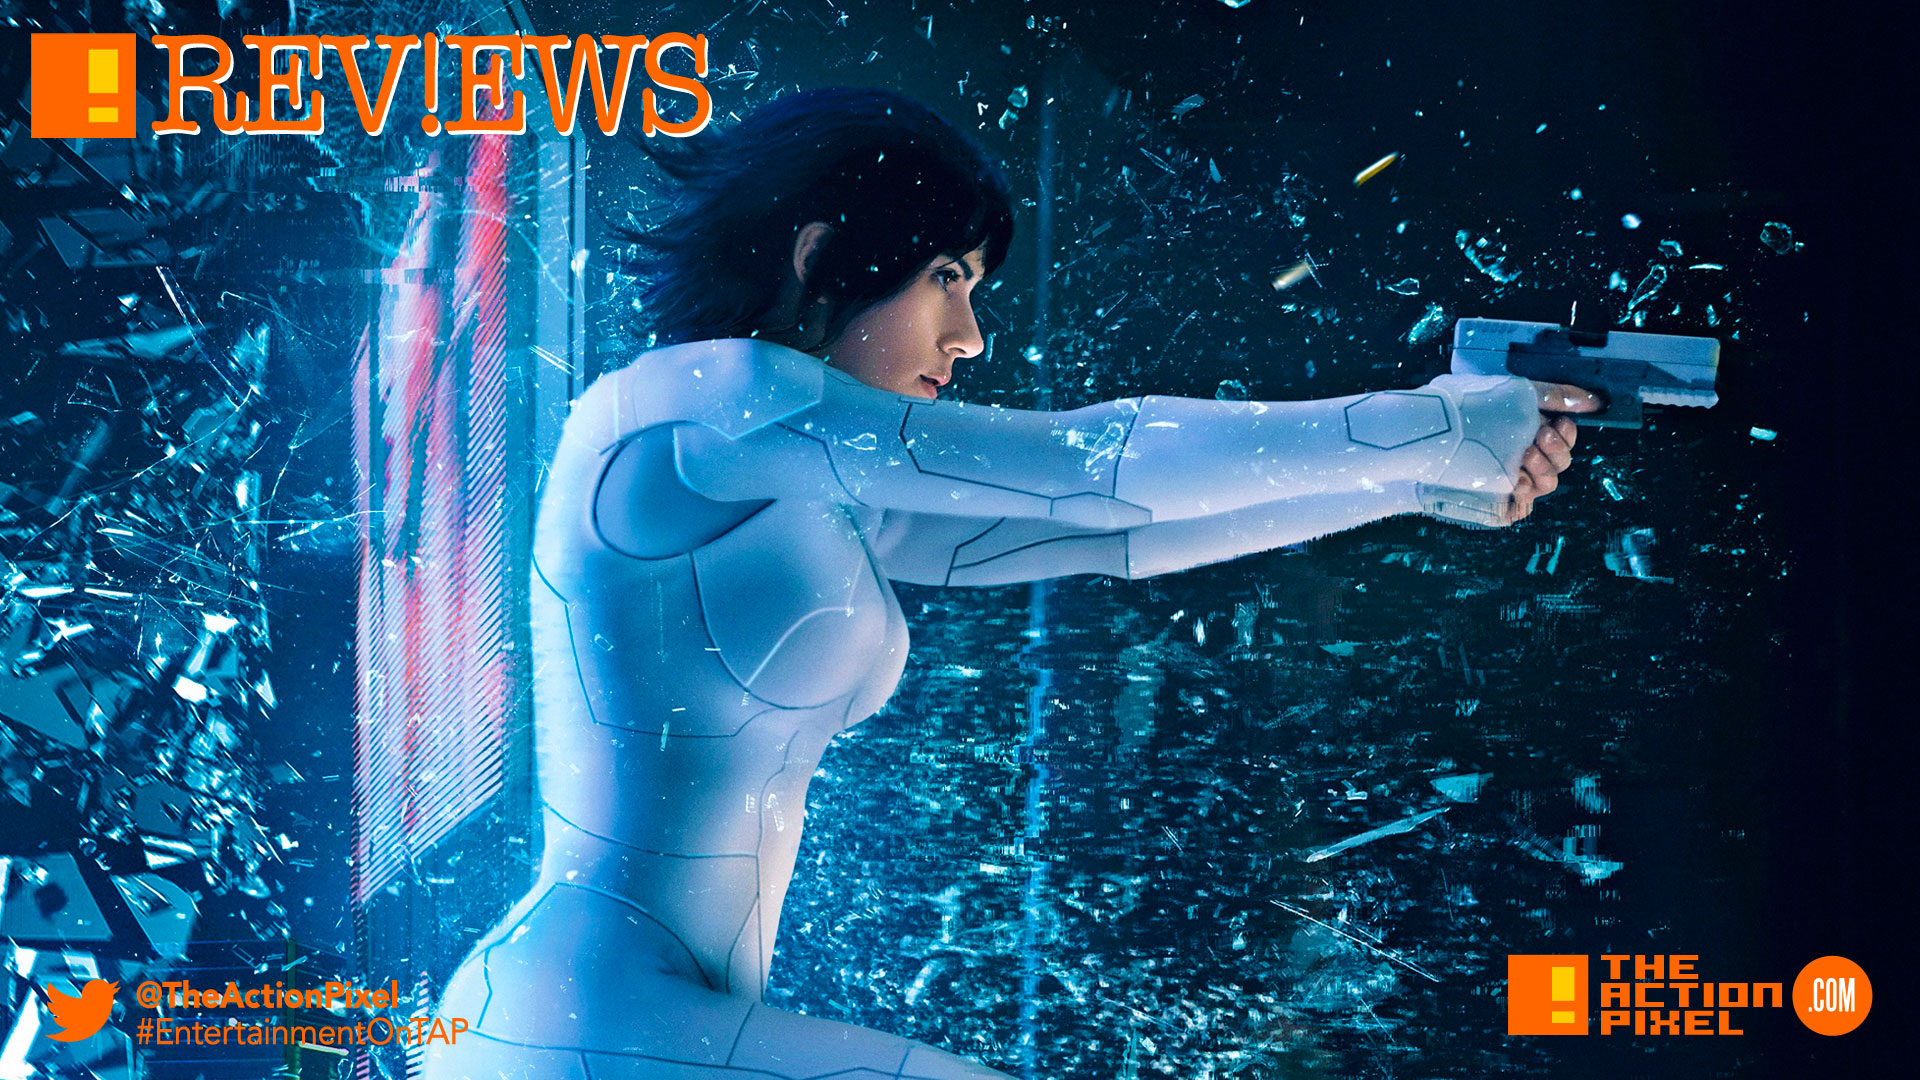 ghost in shell, scar-jo, scar jo, Scarlett Johansson, gits, paramount pictures, the action pixel,, entertainment on tap